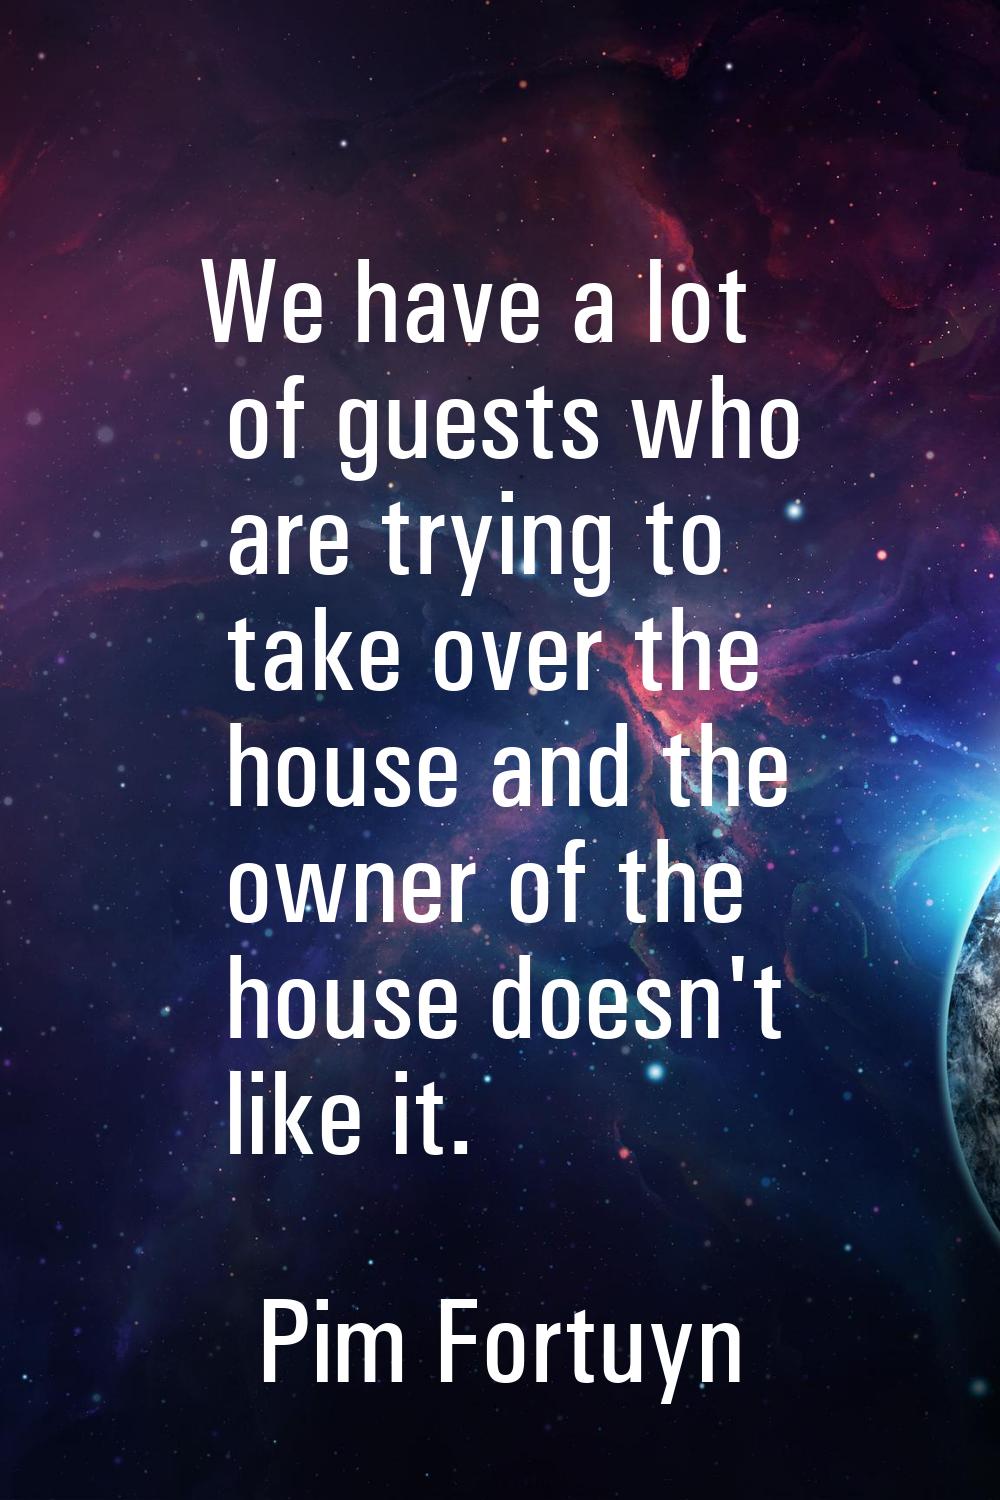 We have a lot of guests who are trying to take over the house and the owner of the house doesn't li